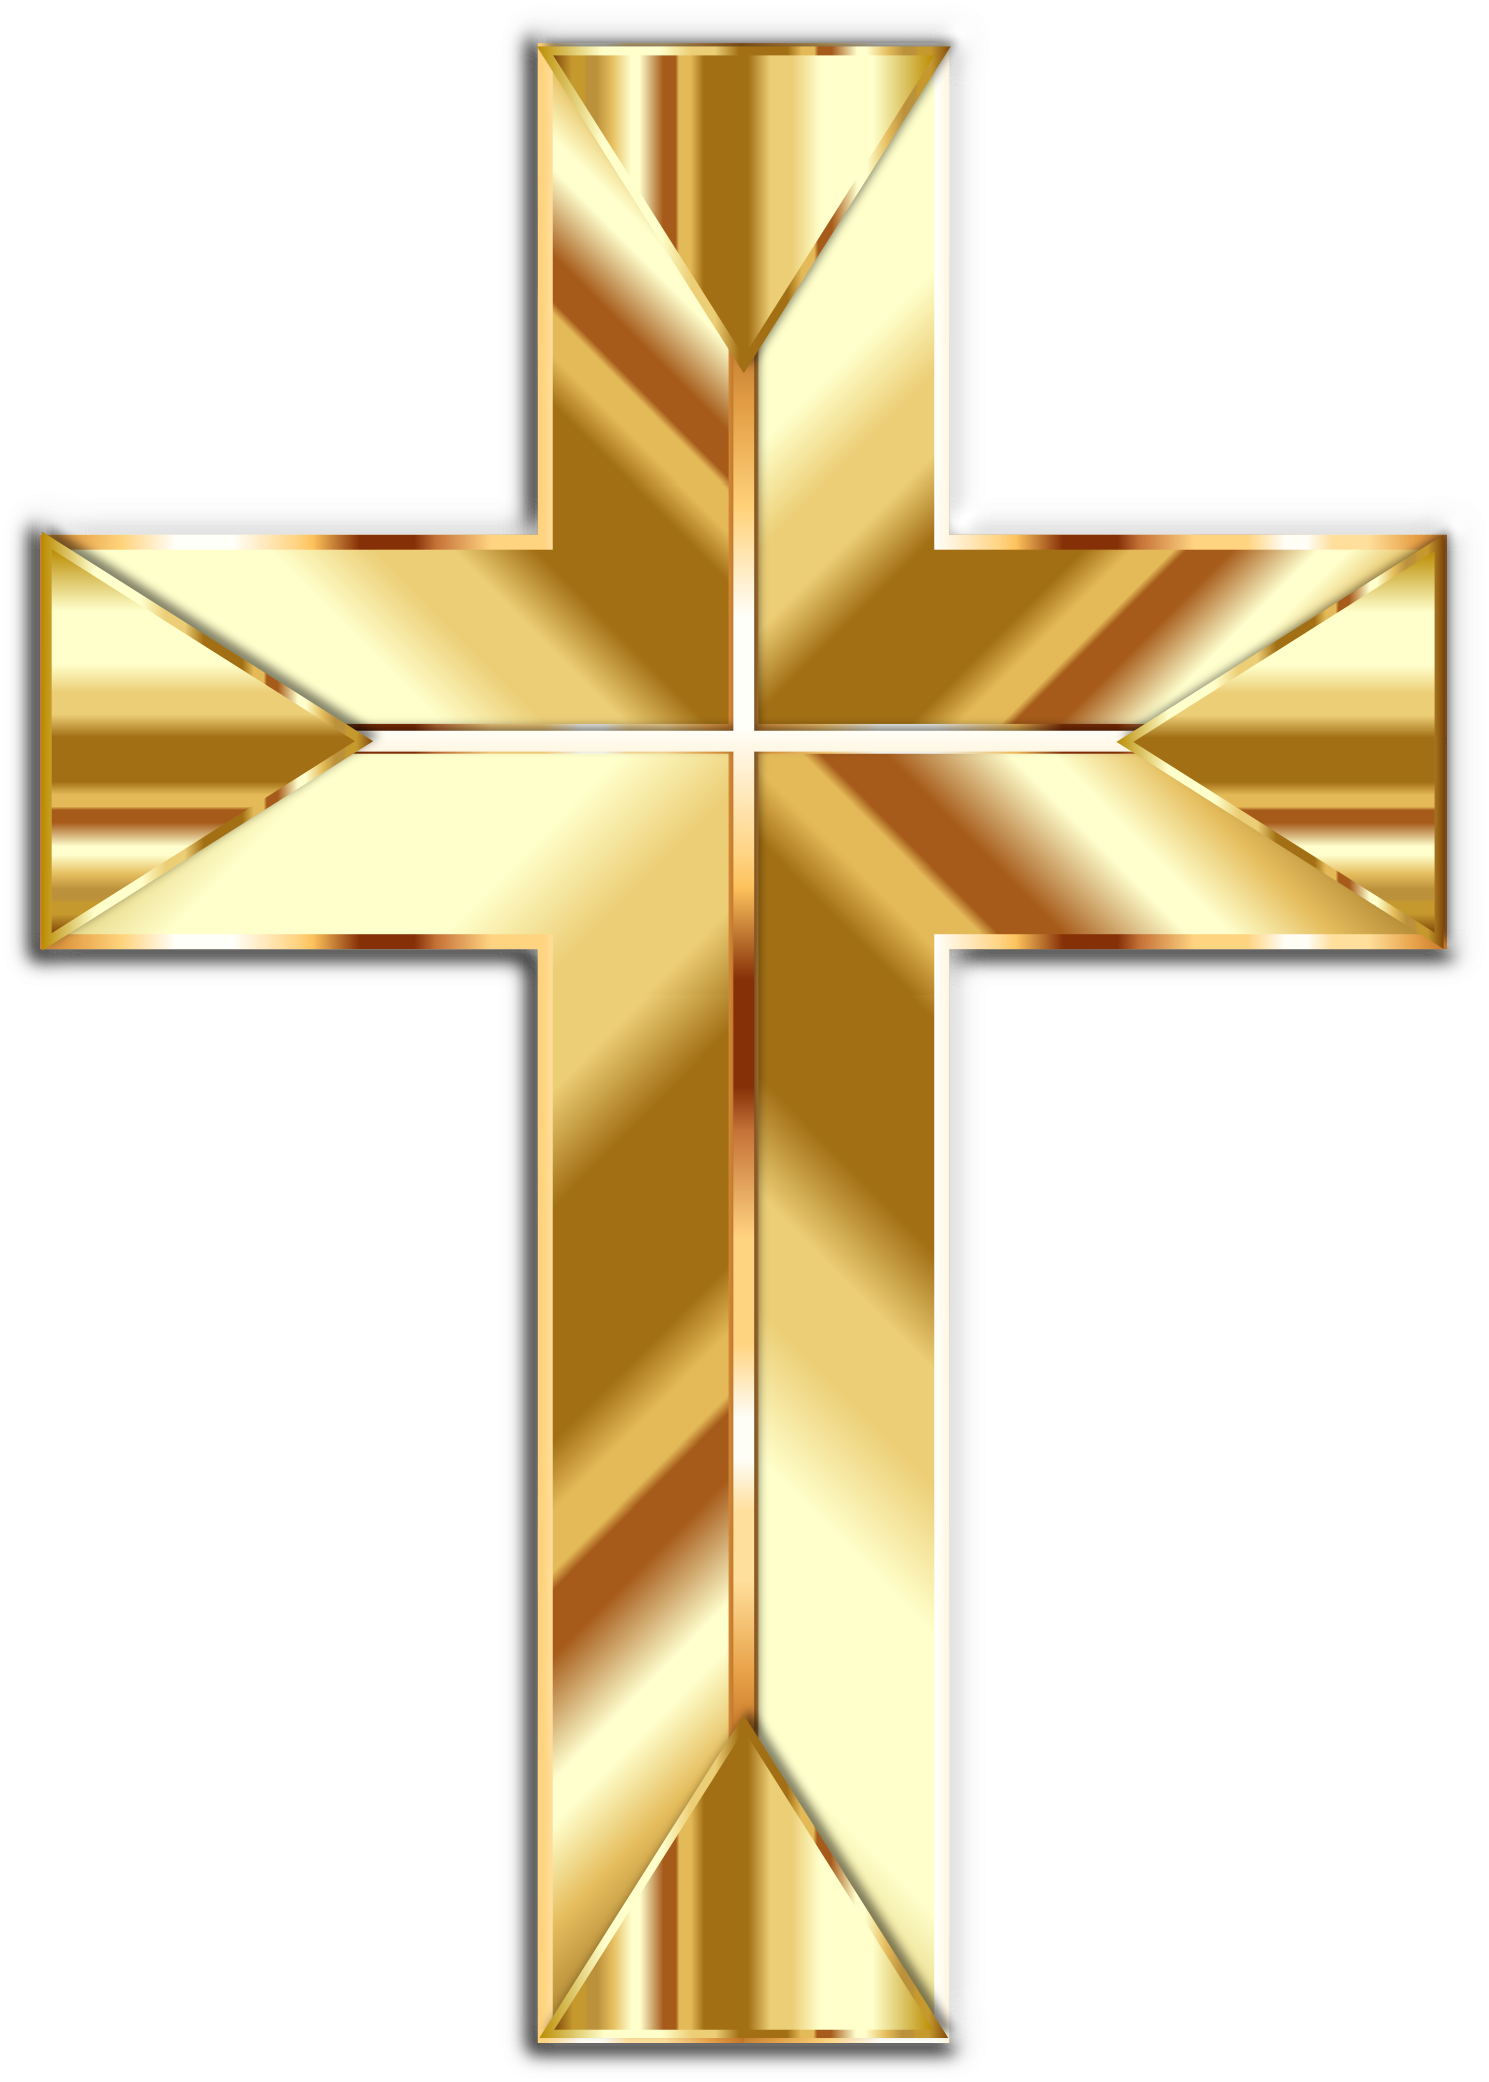 clipart about Golden Cross Fixed - Rockin The Cross Guitar, Find more high ...